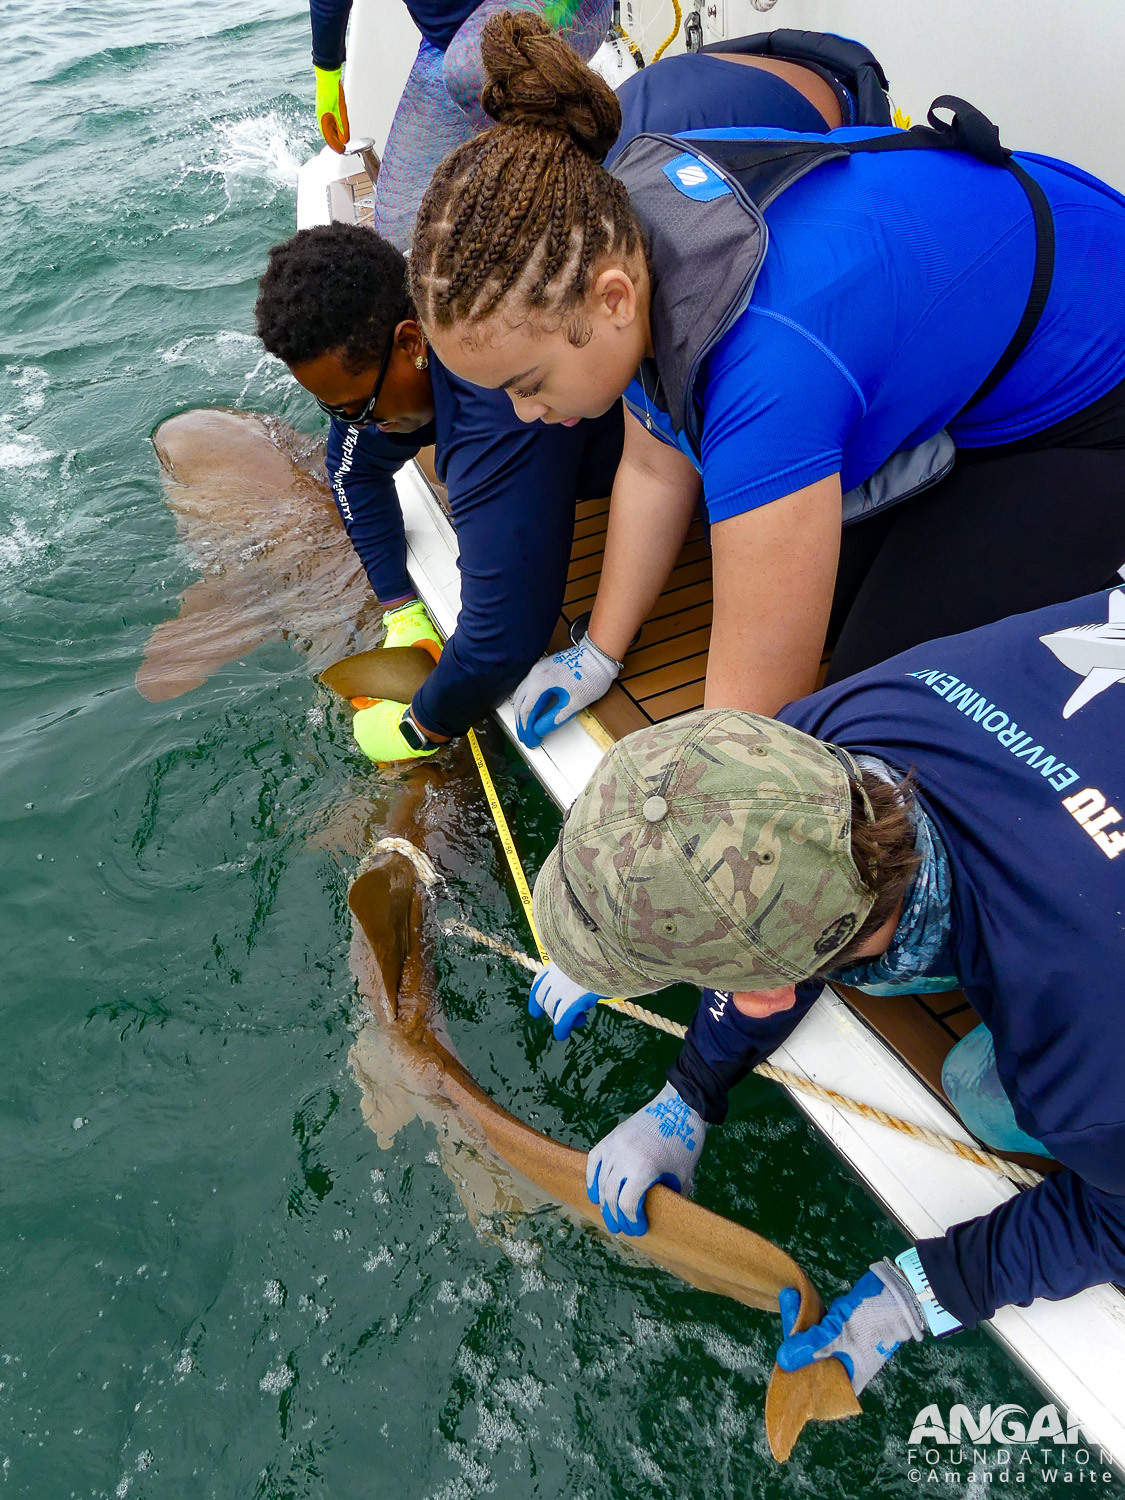 EXP 76: A STEAM Academy Student Helps The Scientists Collect A Series Of Measurements From The Nurse Shark. PC: Amanda Waite